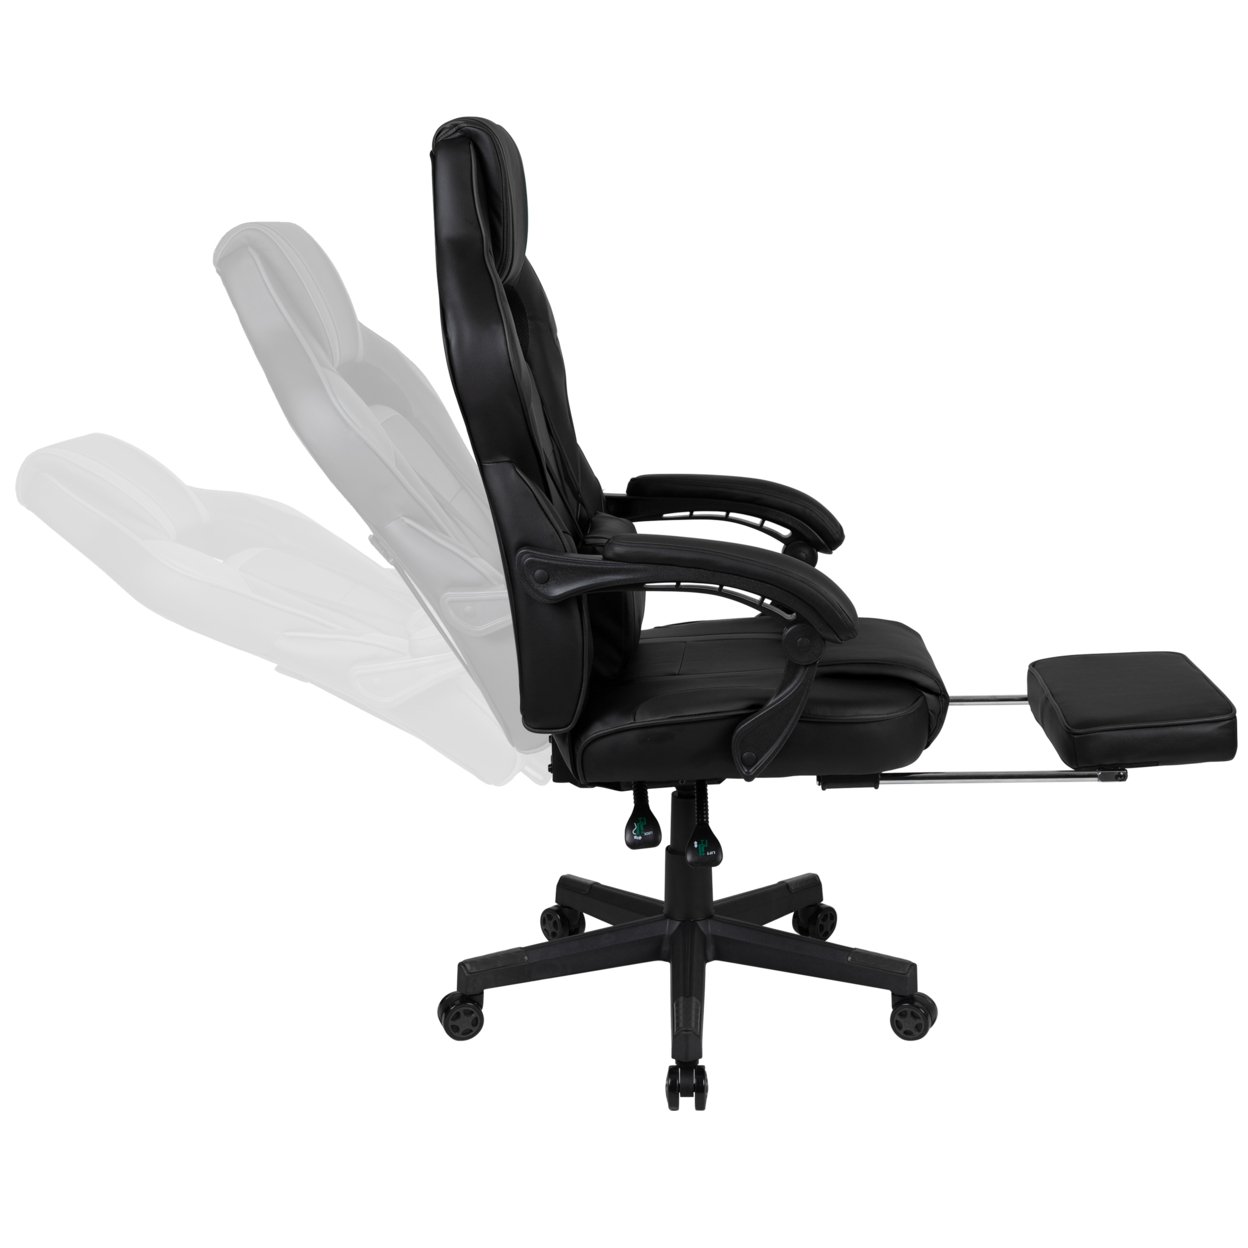 X40 Gaming Chair Racing Ergonomic Computer Chair With Fully Reclining Back And Arms, Slide-Out Footrest, Massaging Lumbar - Black